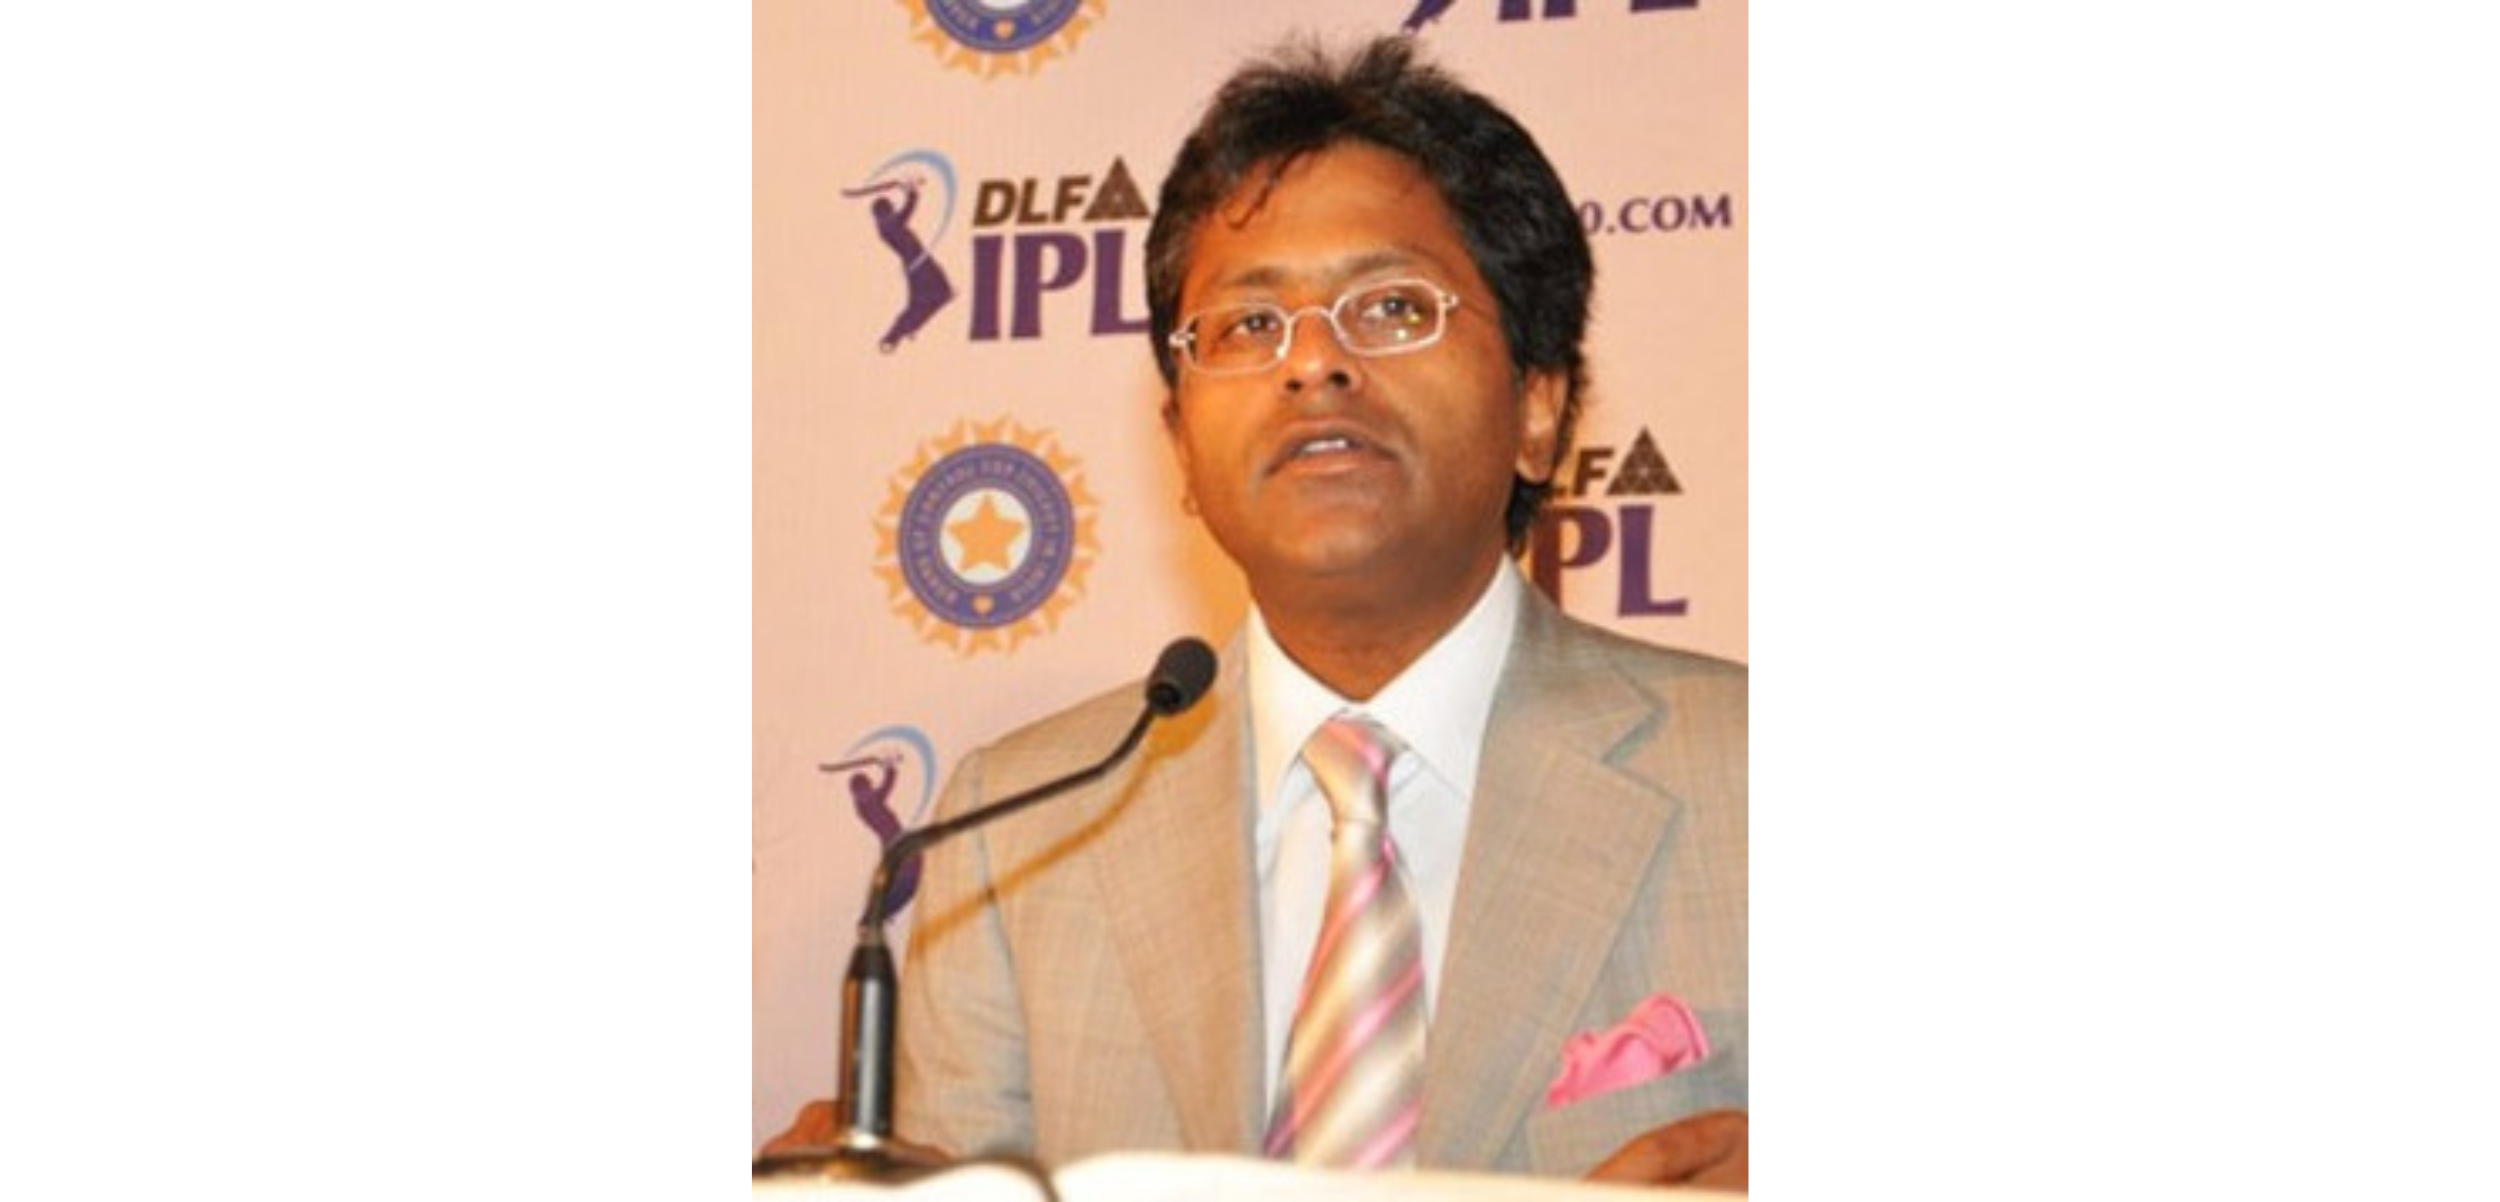 Who’s Who in Cricket: Lalit Modi